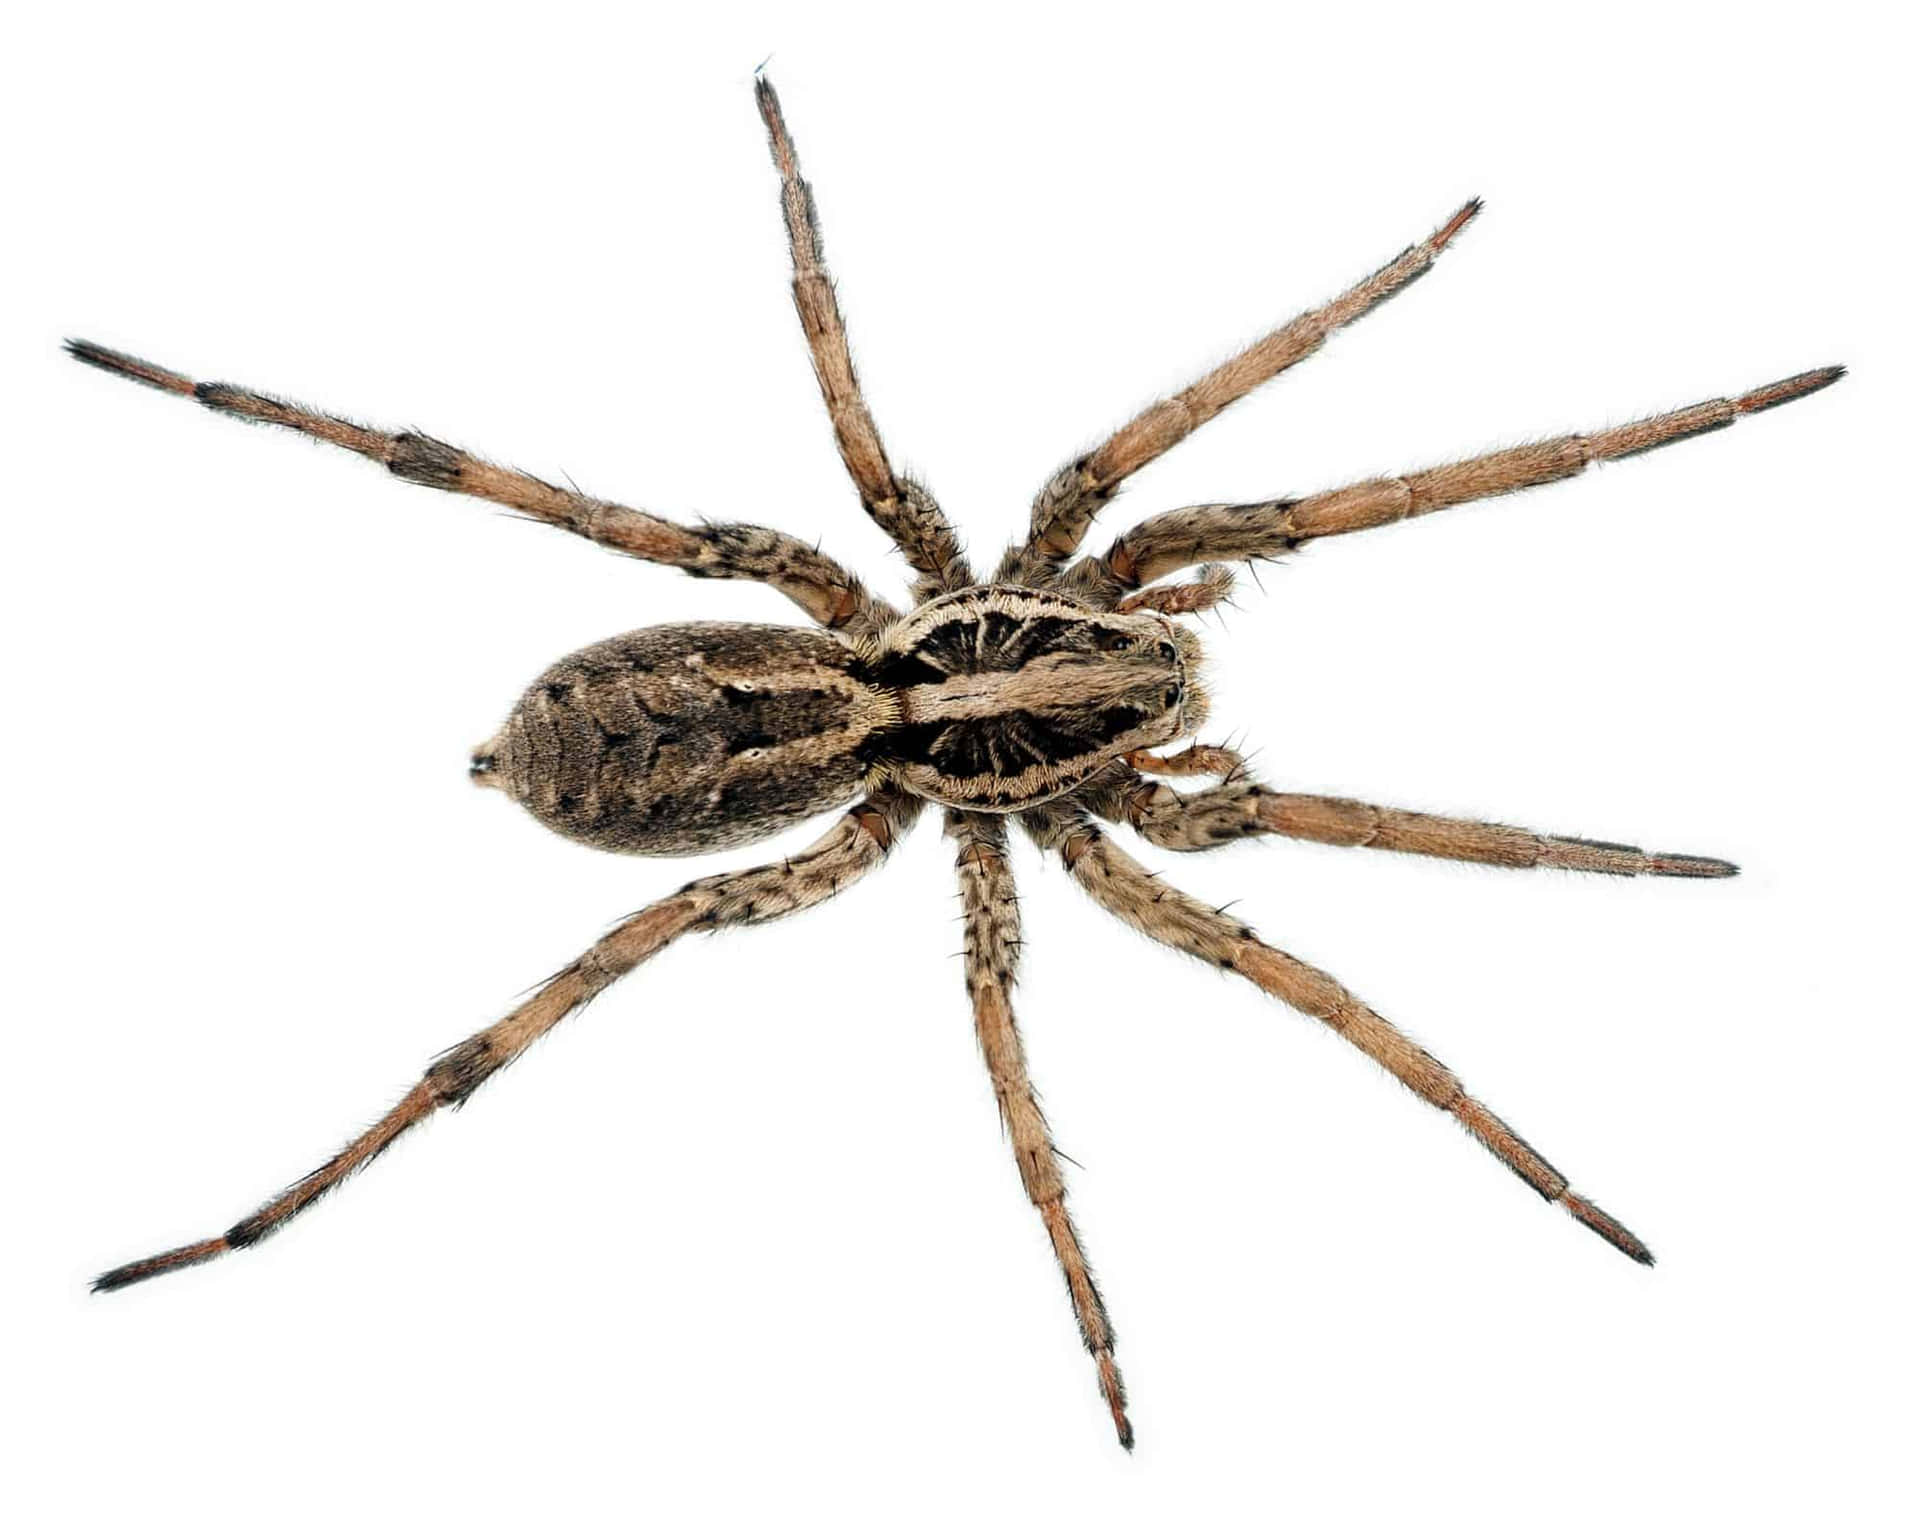 "A Close Up of a Wolf Spider Crawling Along the Ground"